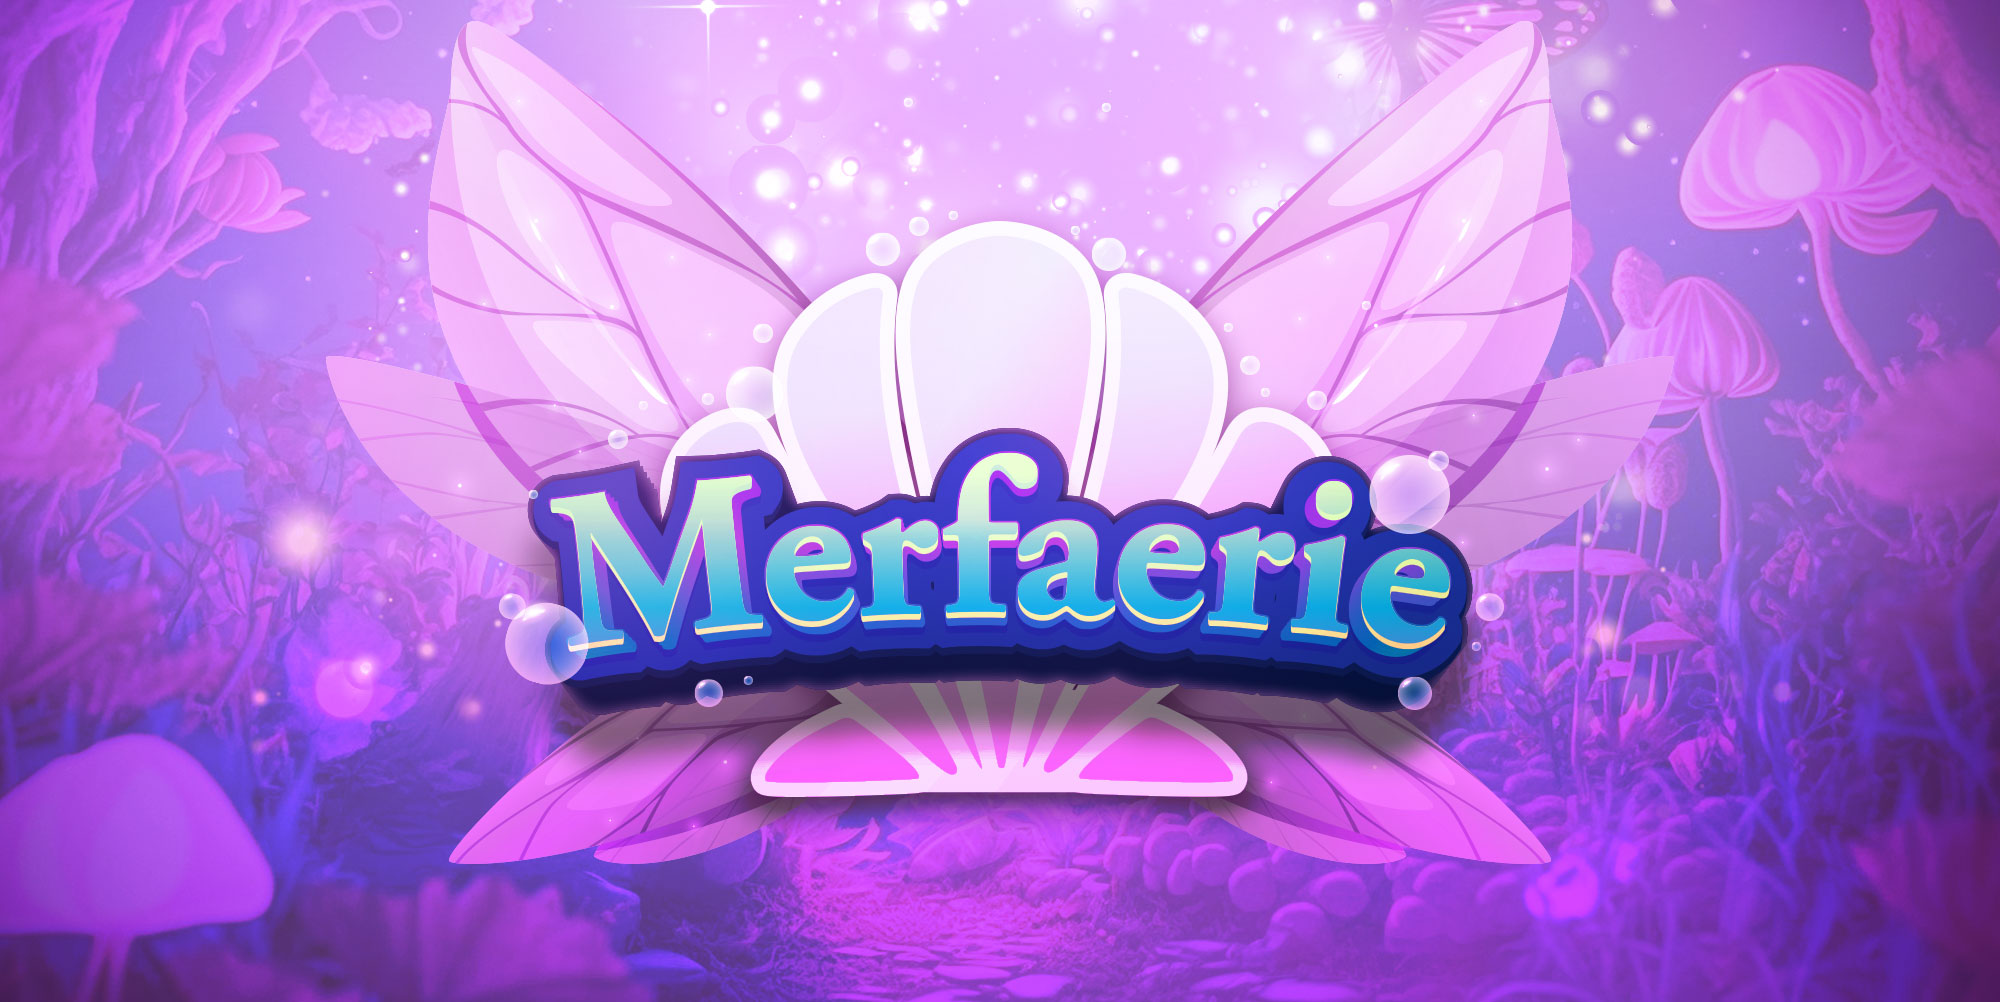 Merfaerie a fantasy podcast and shop where everyday is magick